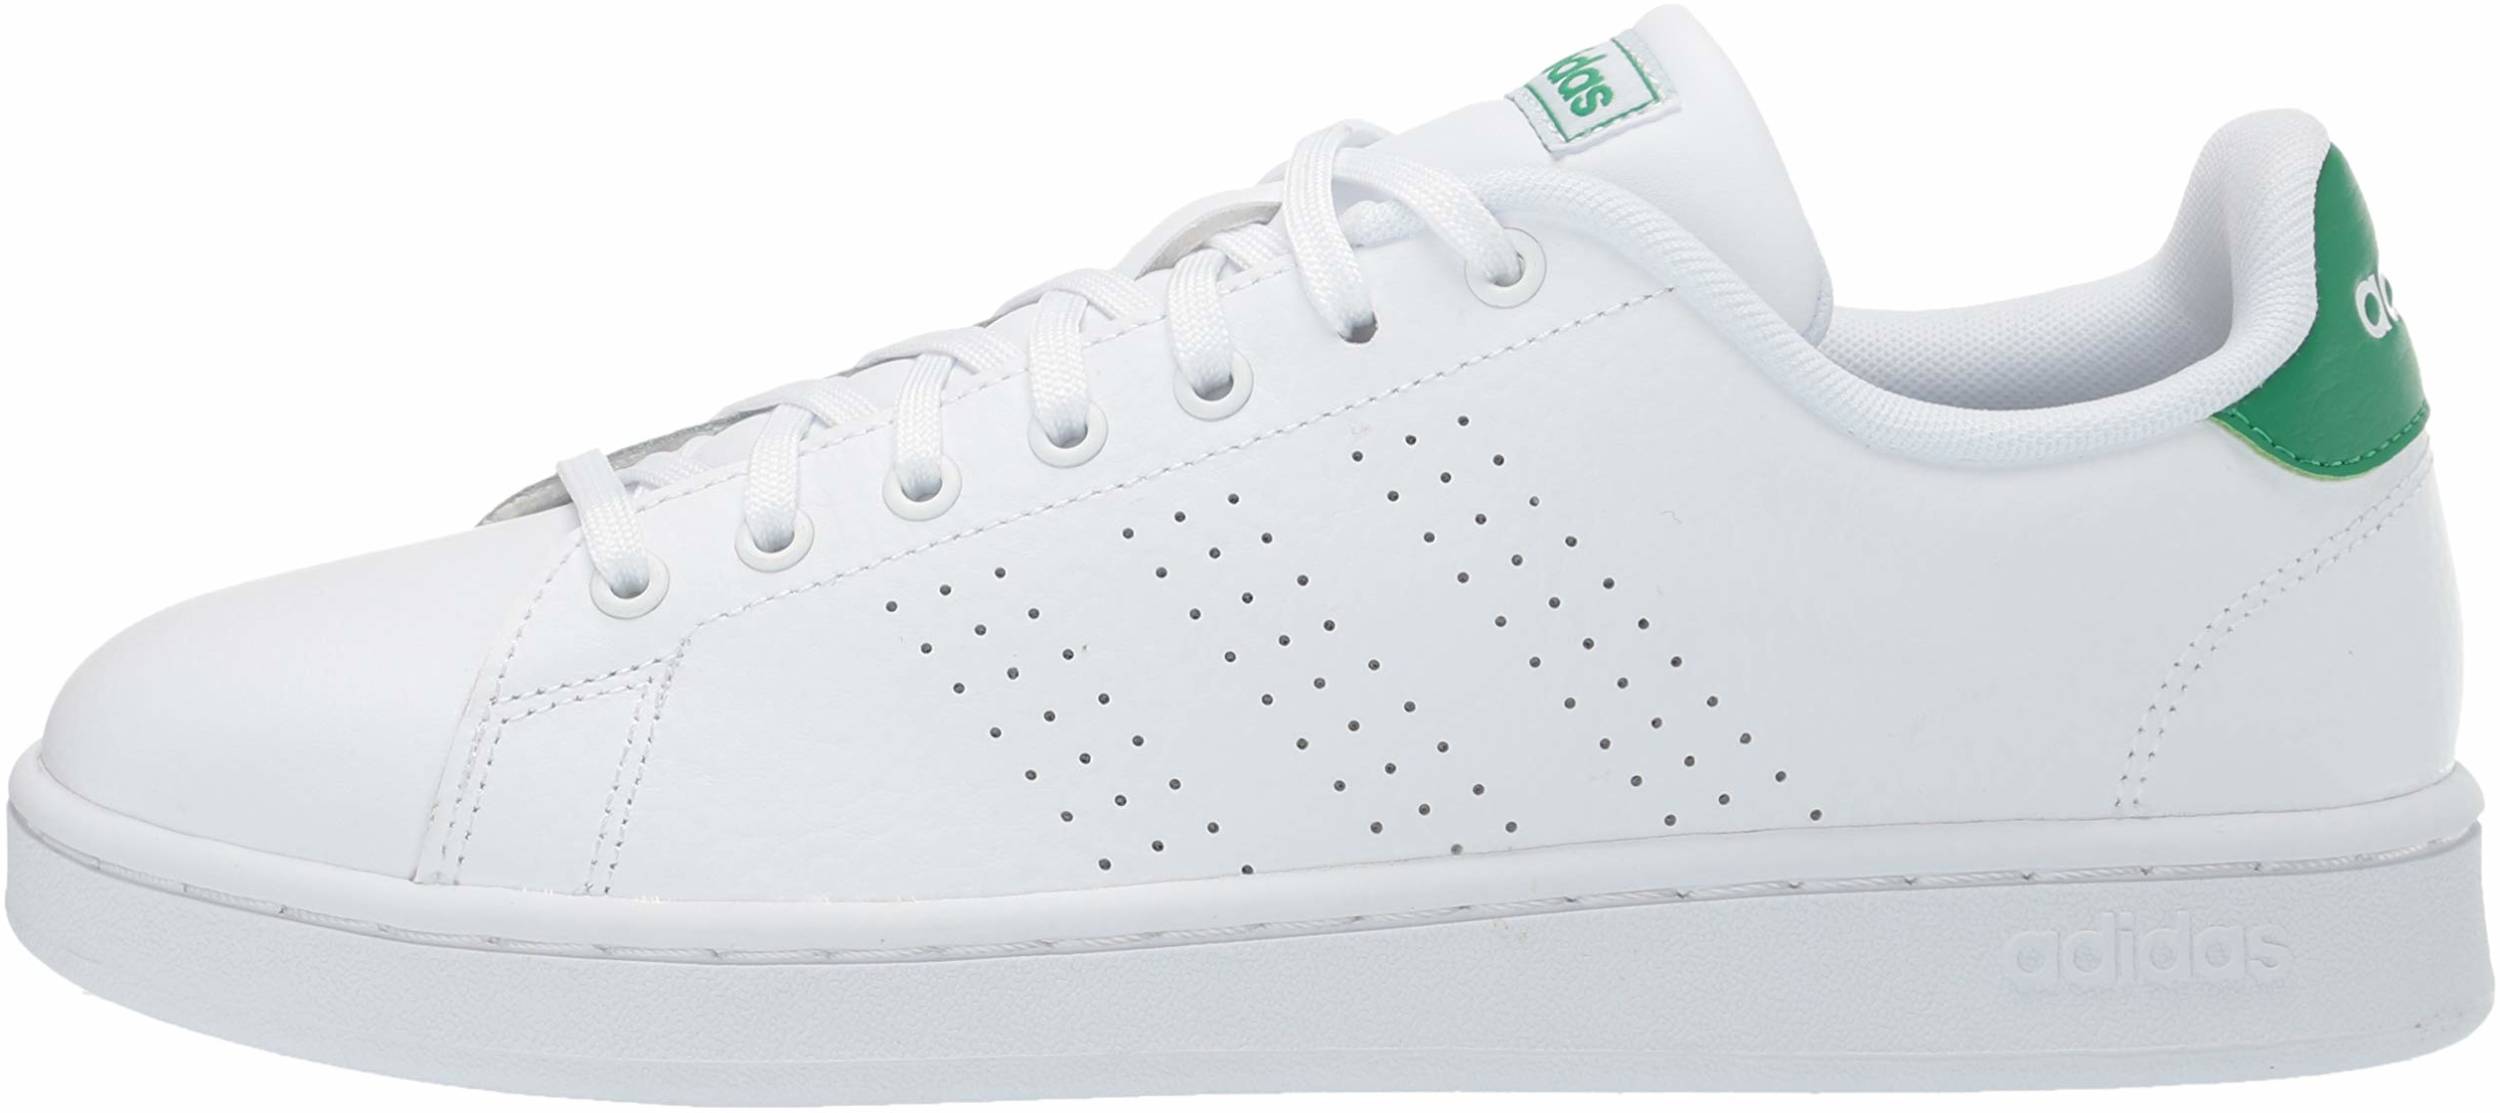 Save 54% on Adidas Cheap Sneakers (50 